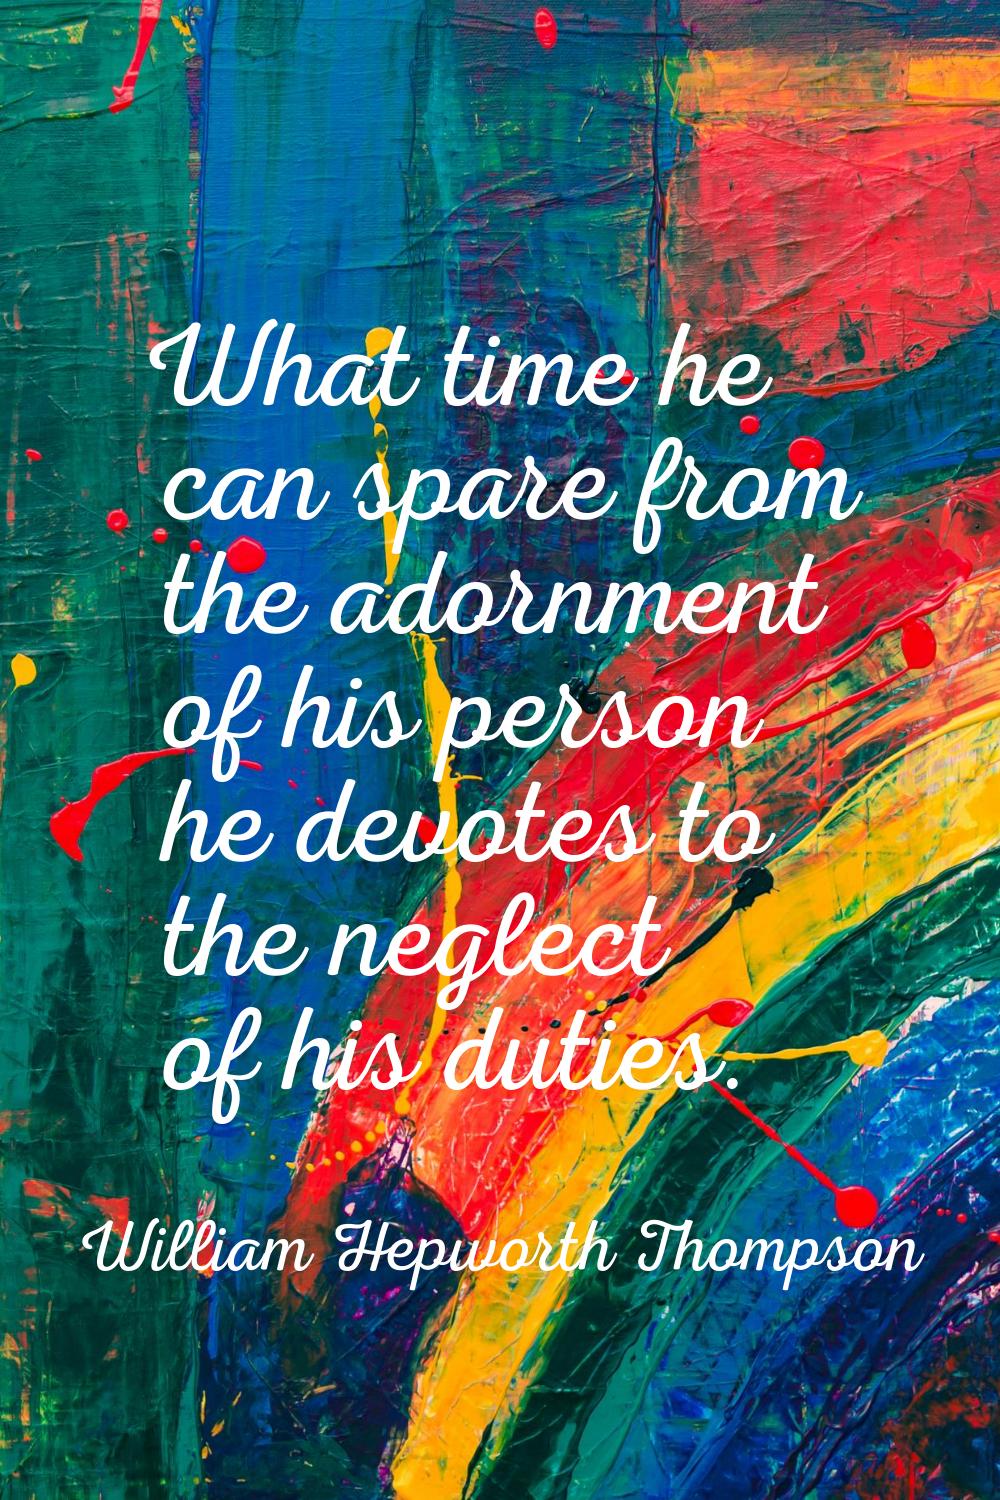 What time he can spare from the adornment of his person he devotes to the neglect of his duties.